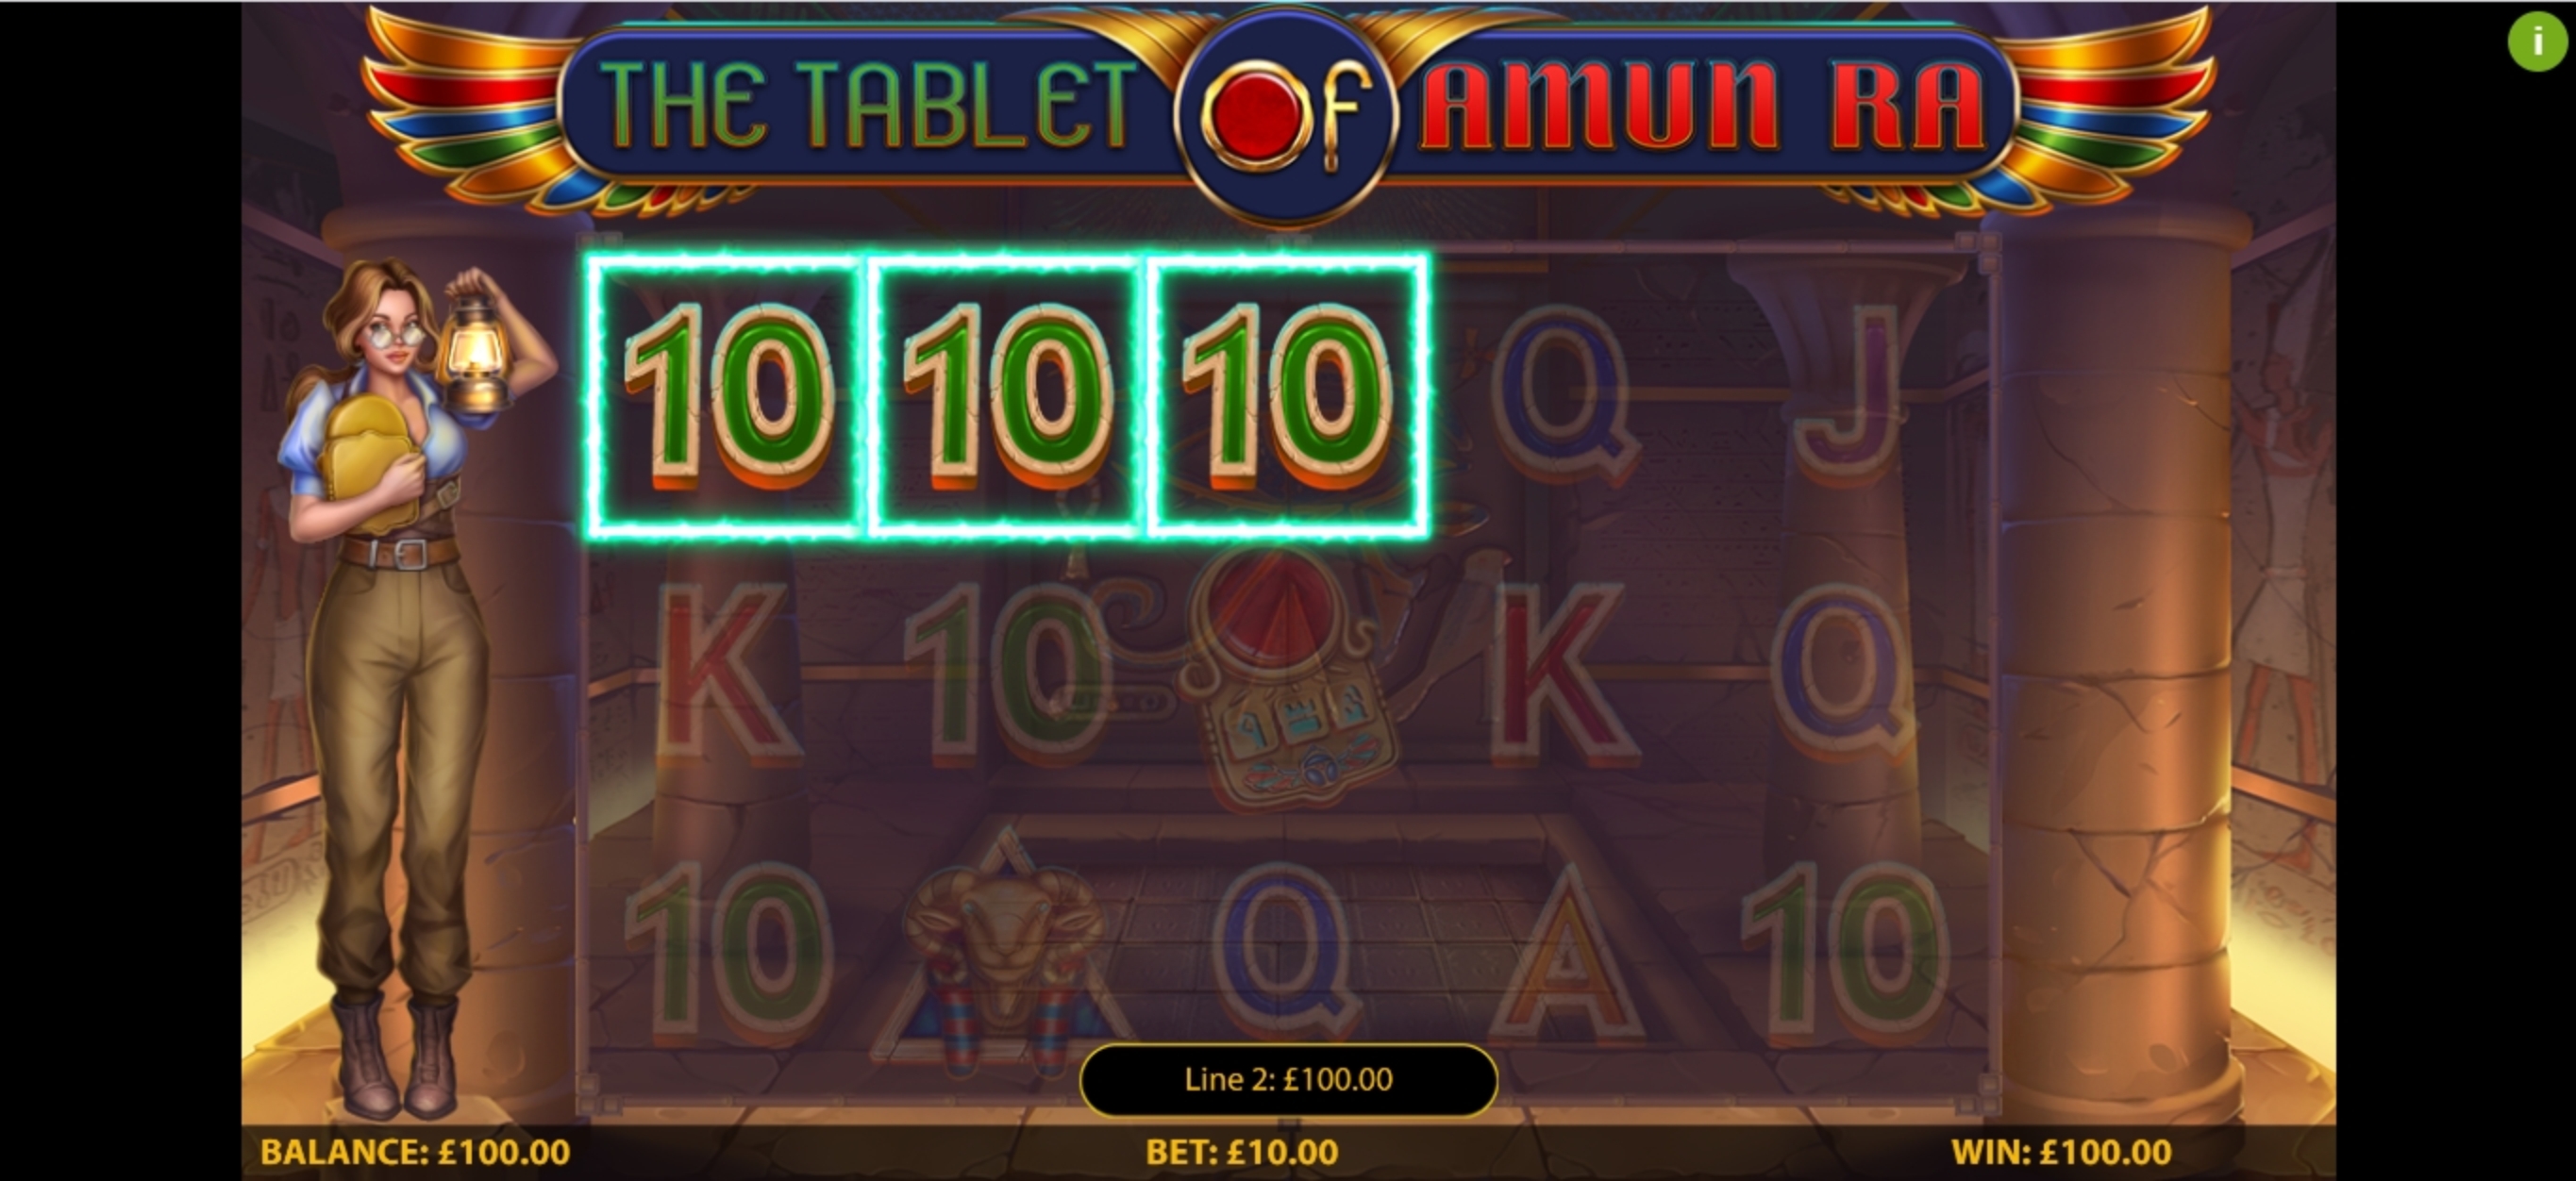 Win Money in The Tablet of Amun Ra Free Slot Game by HungryBear